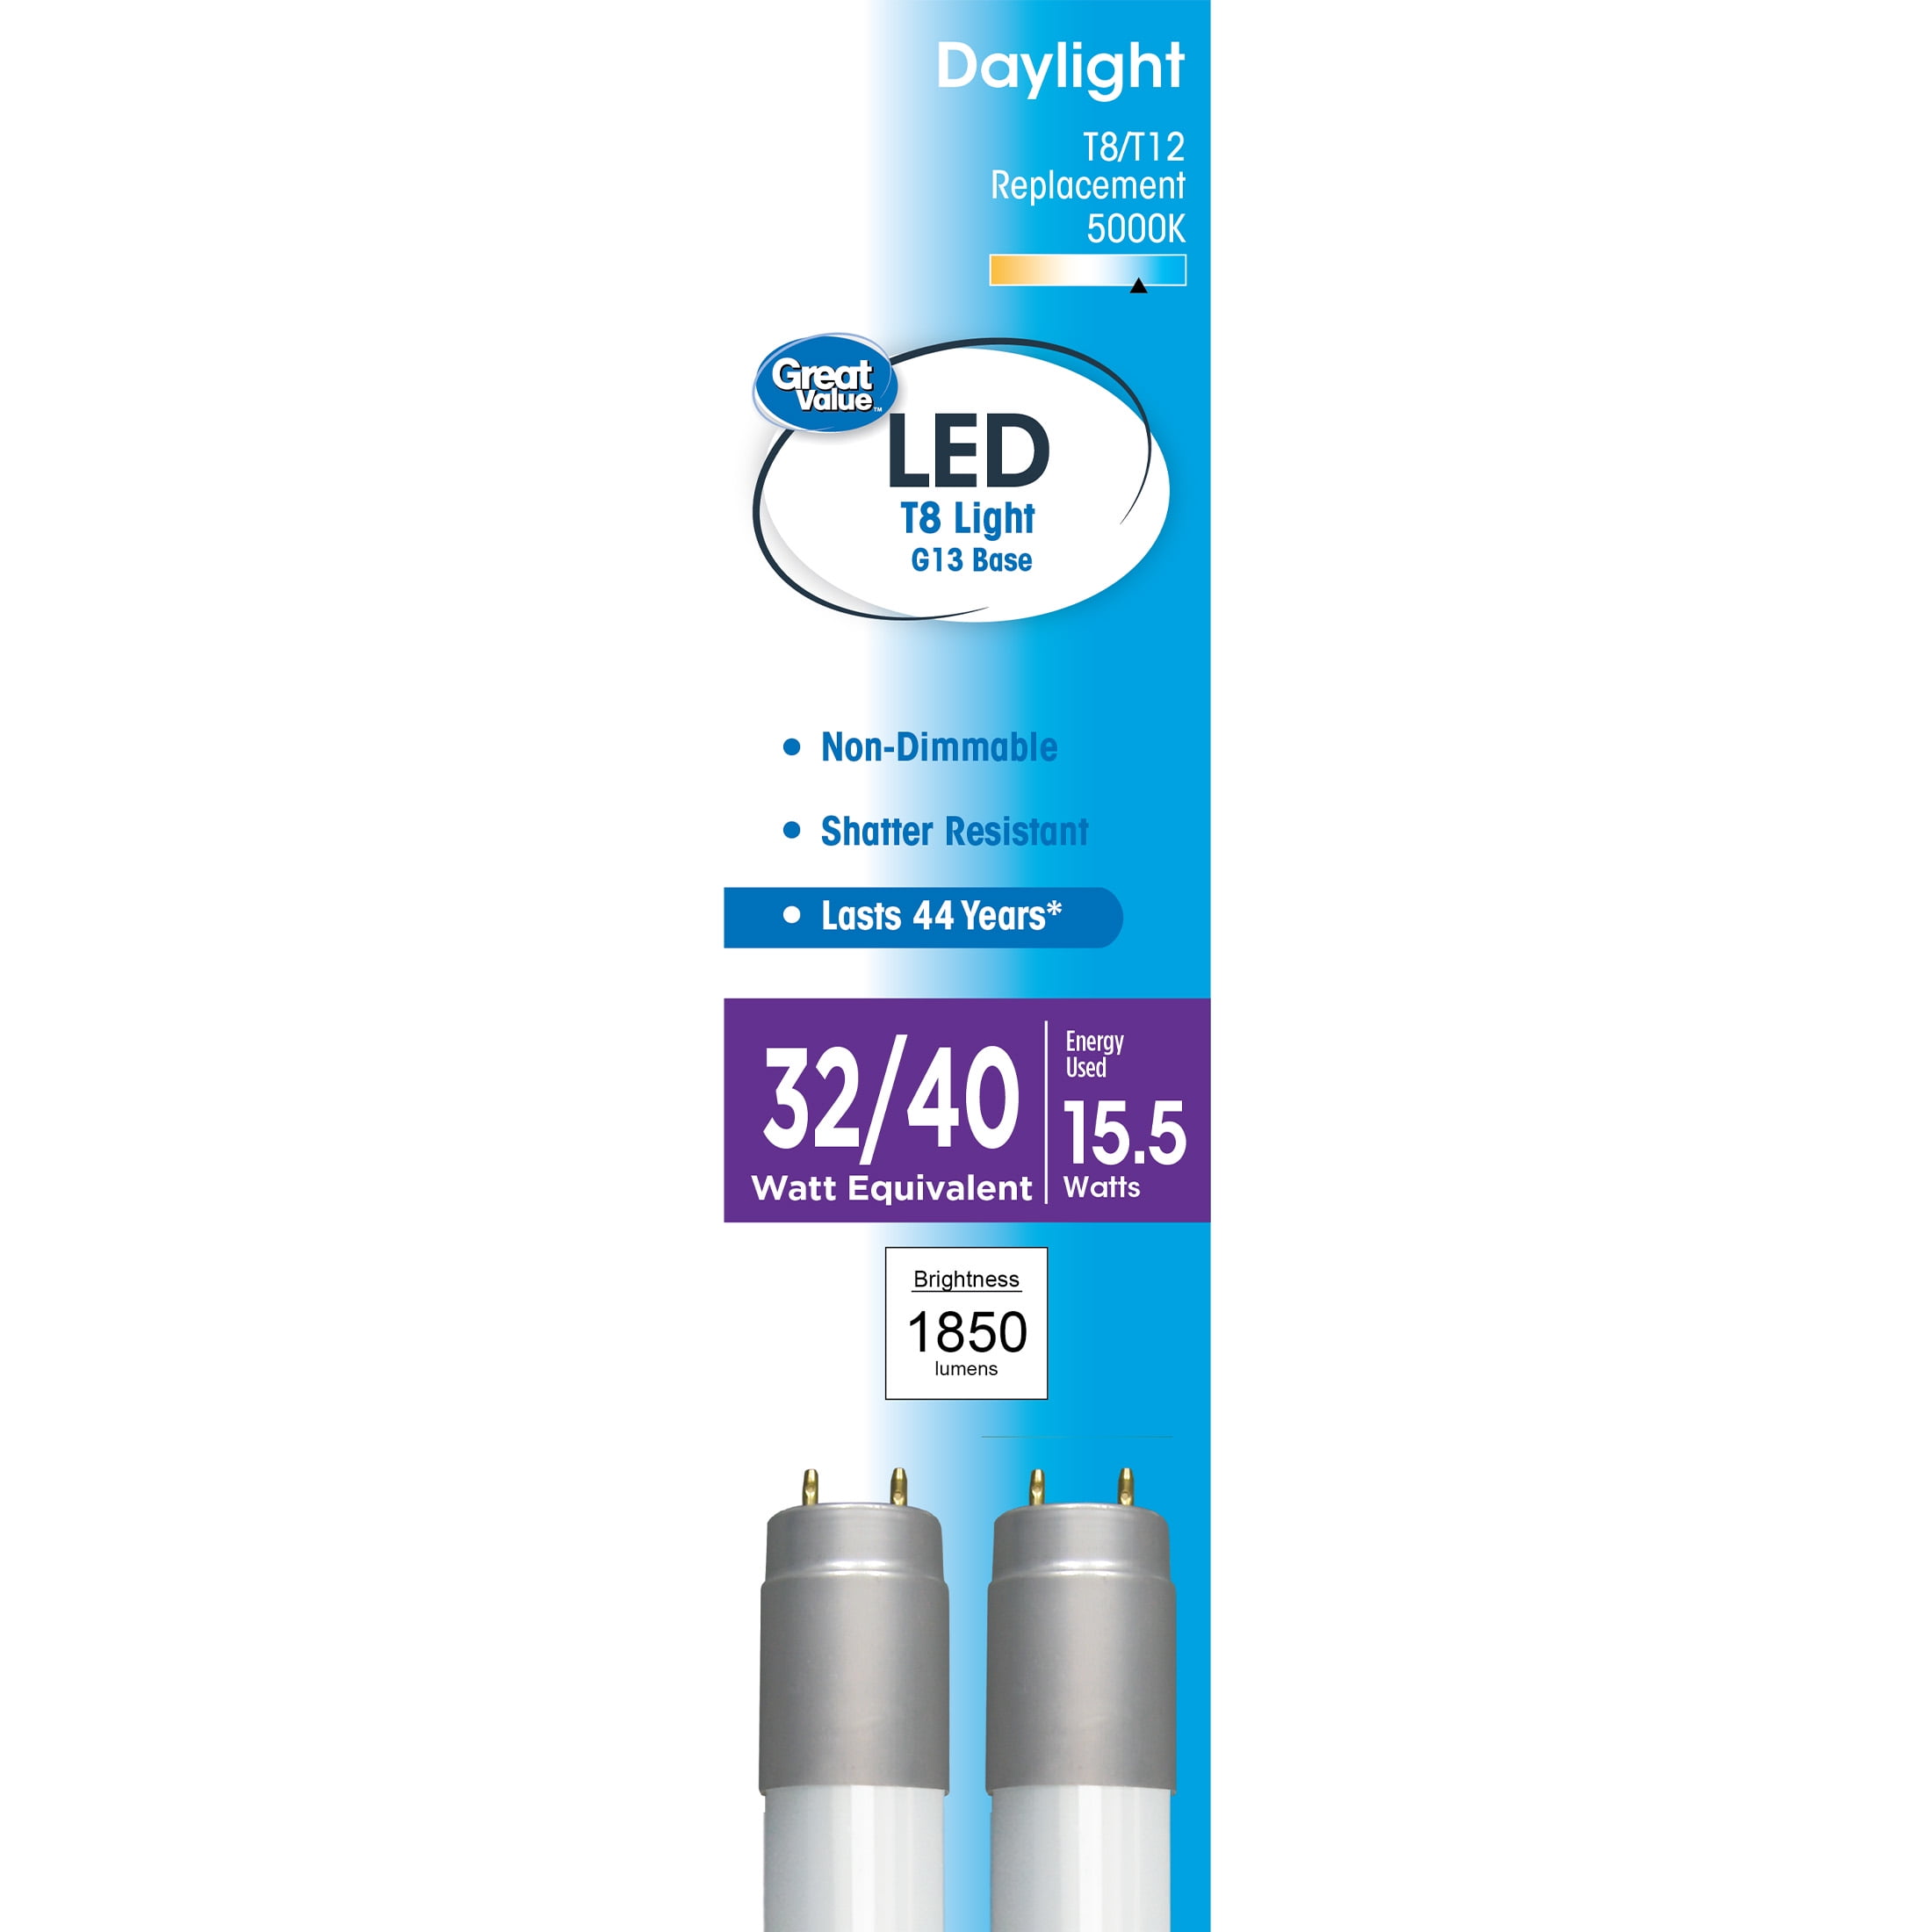 Verstikken Scharnier druiven Great Value LED Tube, 17 Watts (32W/40W Equivalent) T8/T12 Replacement Lamp  G13 Base, Non-Dimmable, Daylight, 48-inches, 2-Pack - Walmart.com